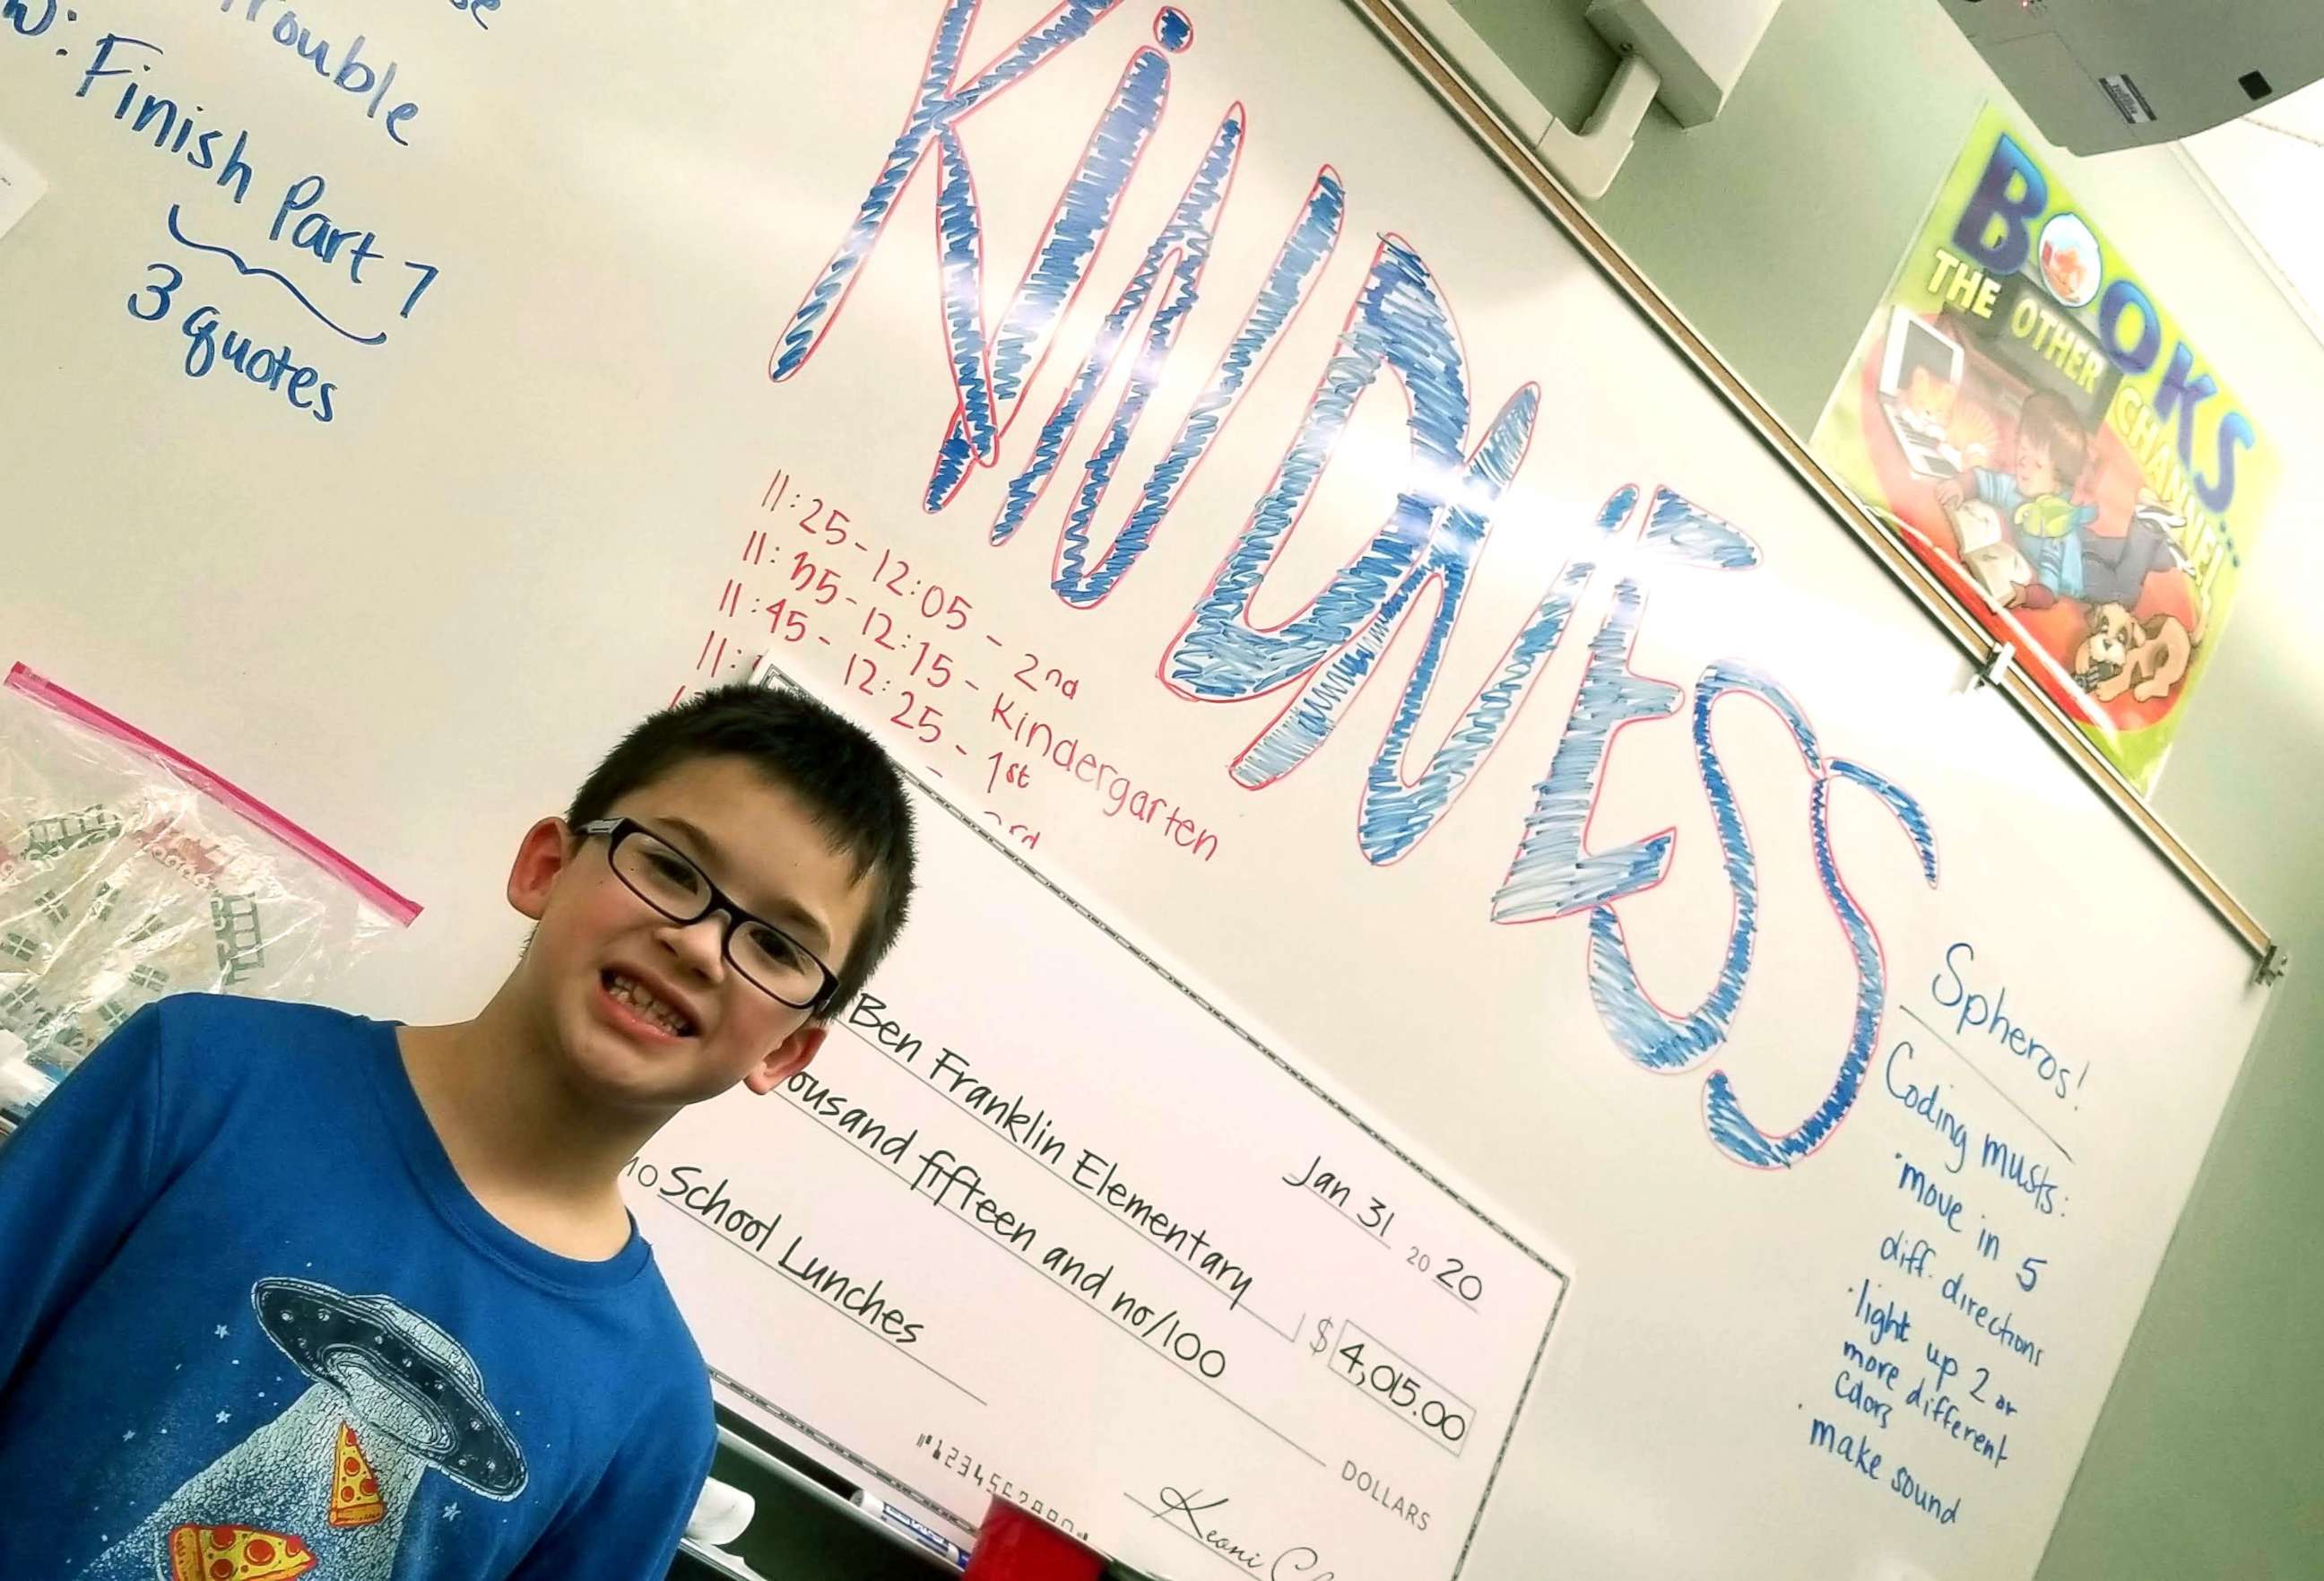 PHOTO: Keoni Ching, 8, raised more than $4,000 by making kindness keychains.